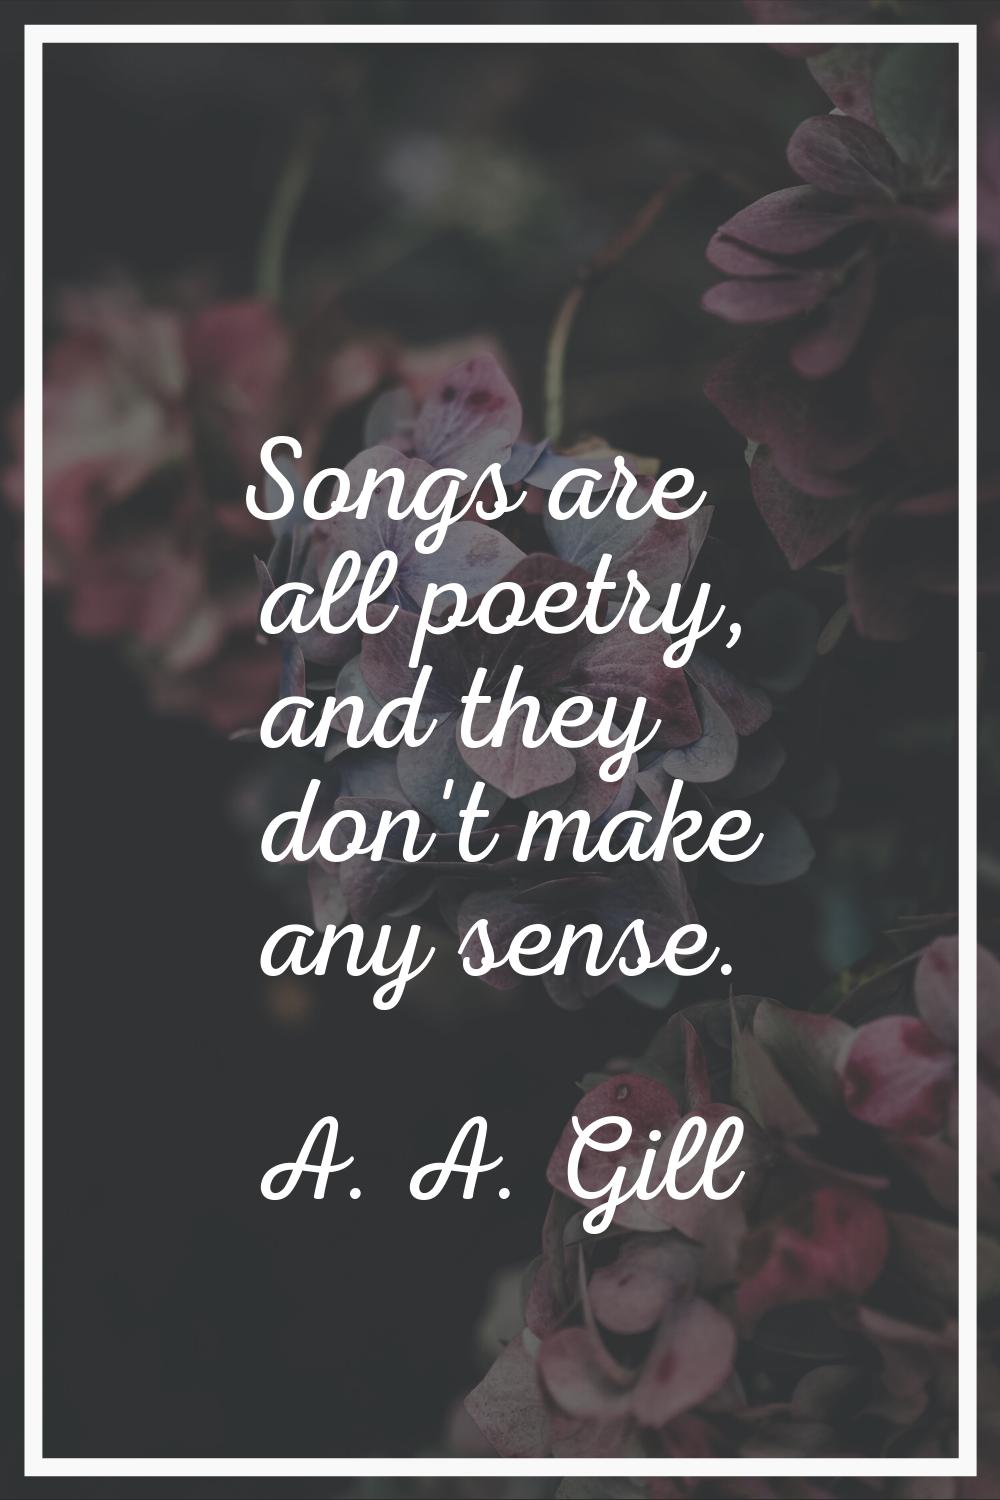 Songs are all poetry, and they don't make any sense.